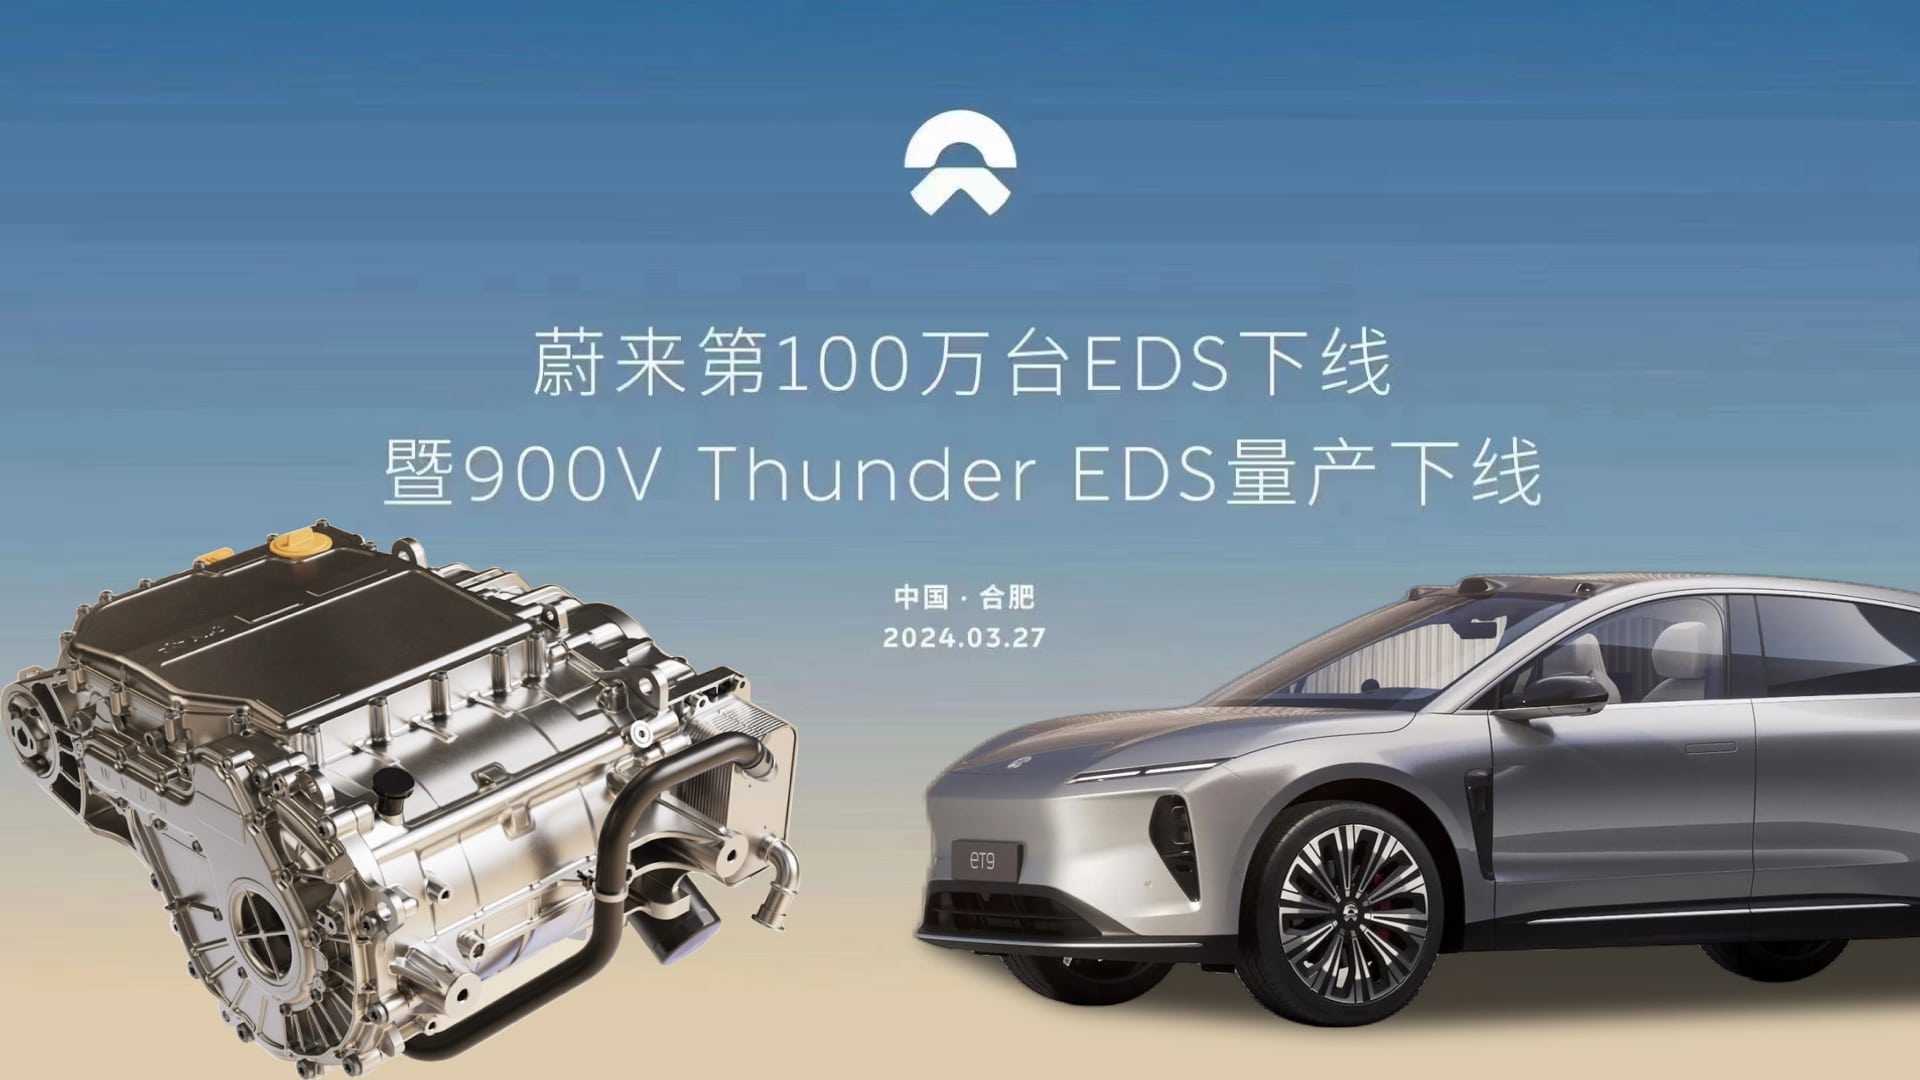 Nio rolls out world’s first mass-produced 900V drive system